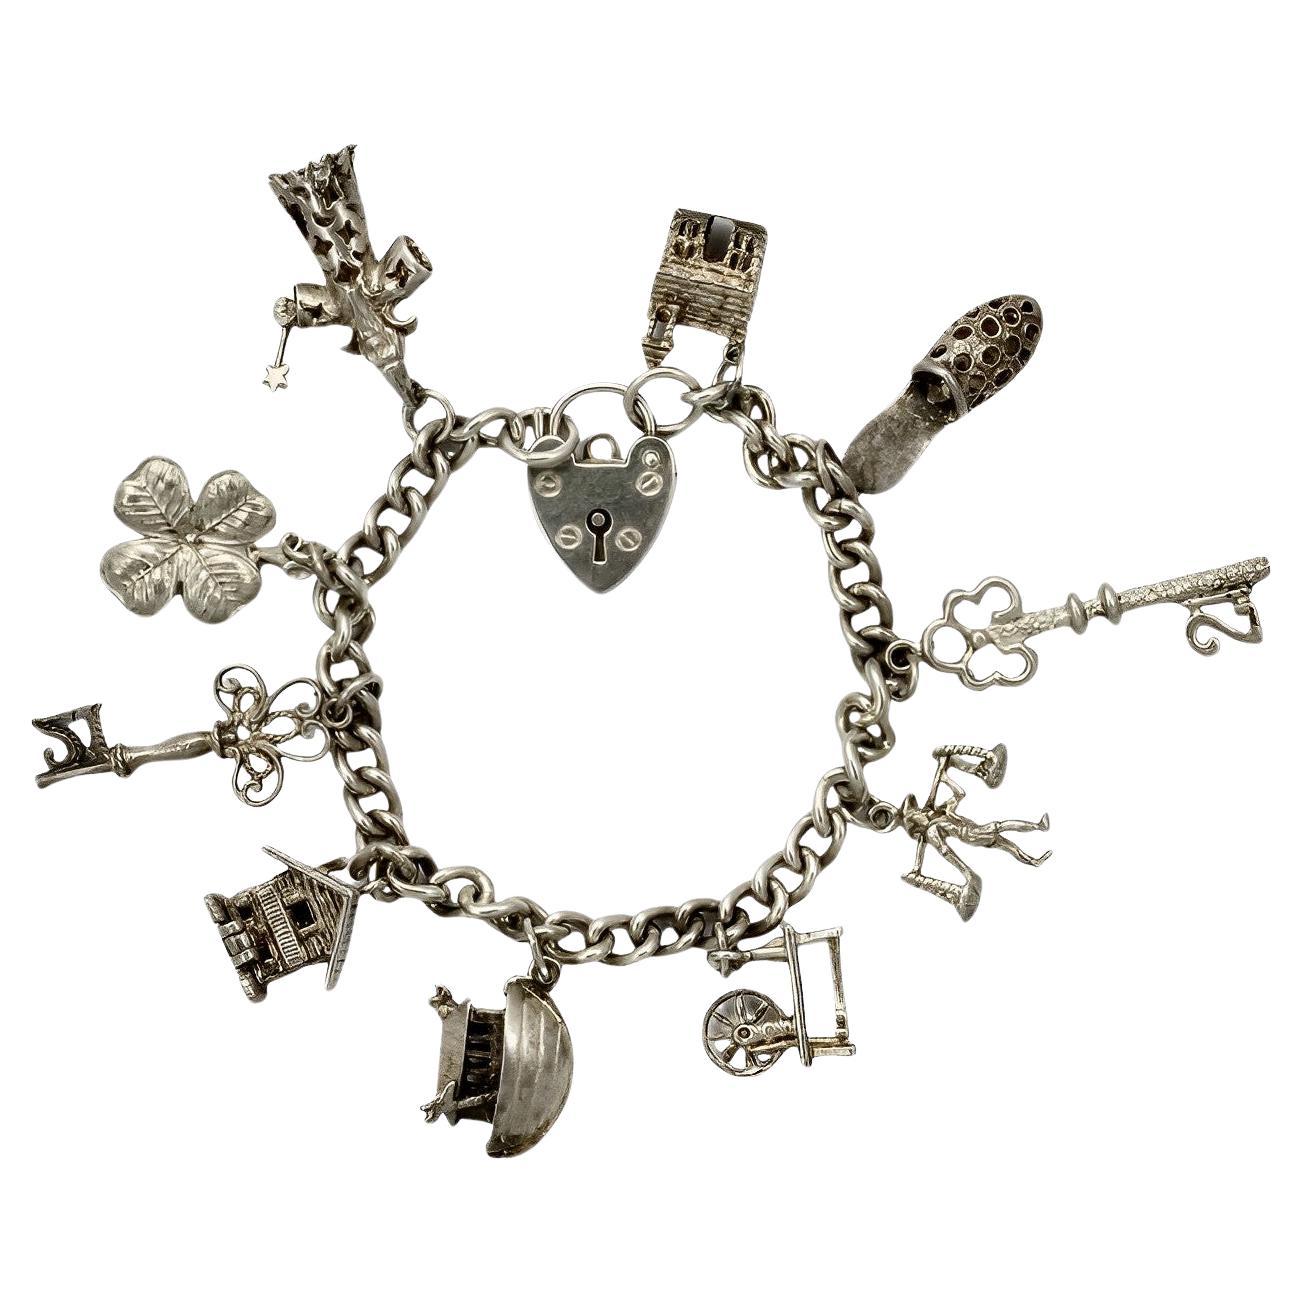 Englisches Sterlingsilber-Charm-Armband 1970er Jahre